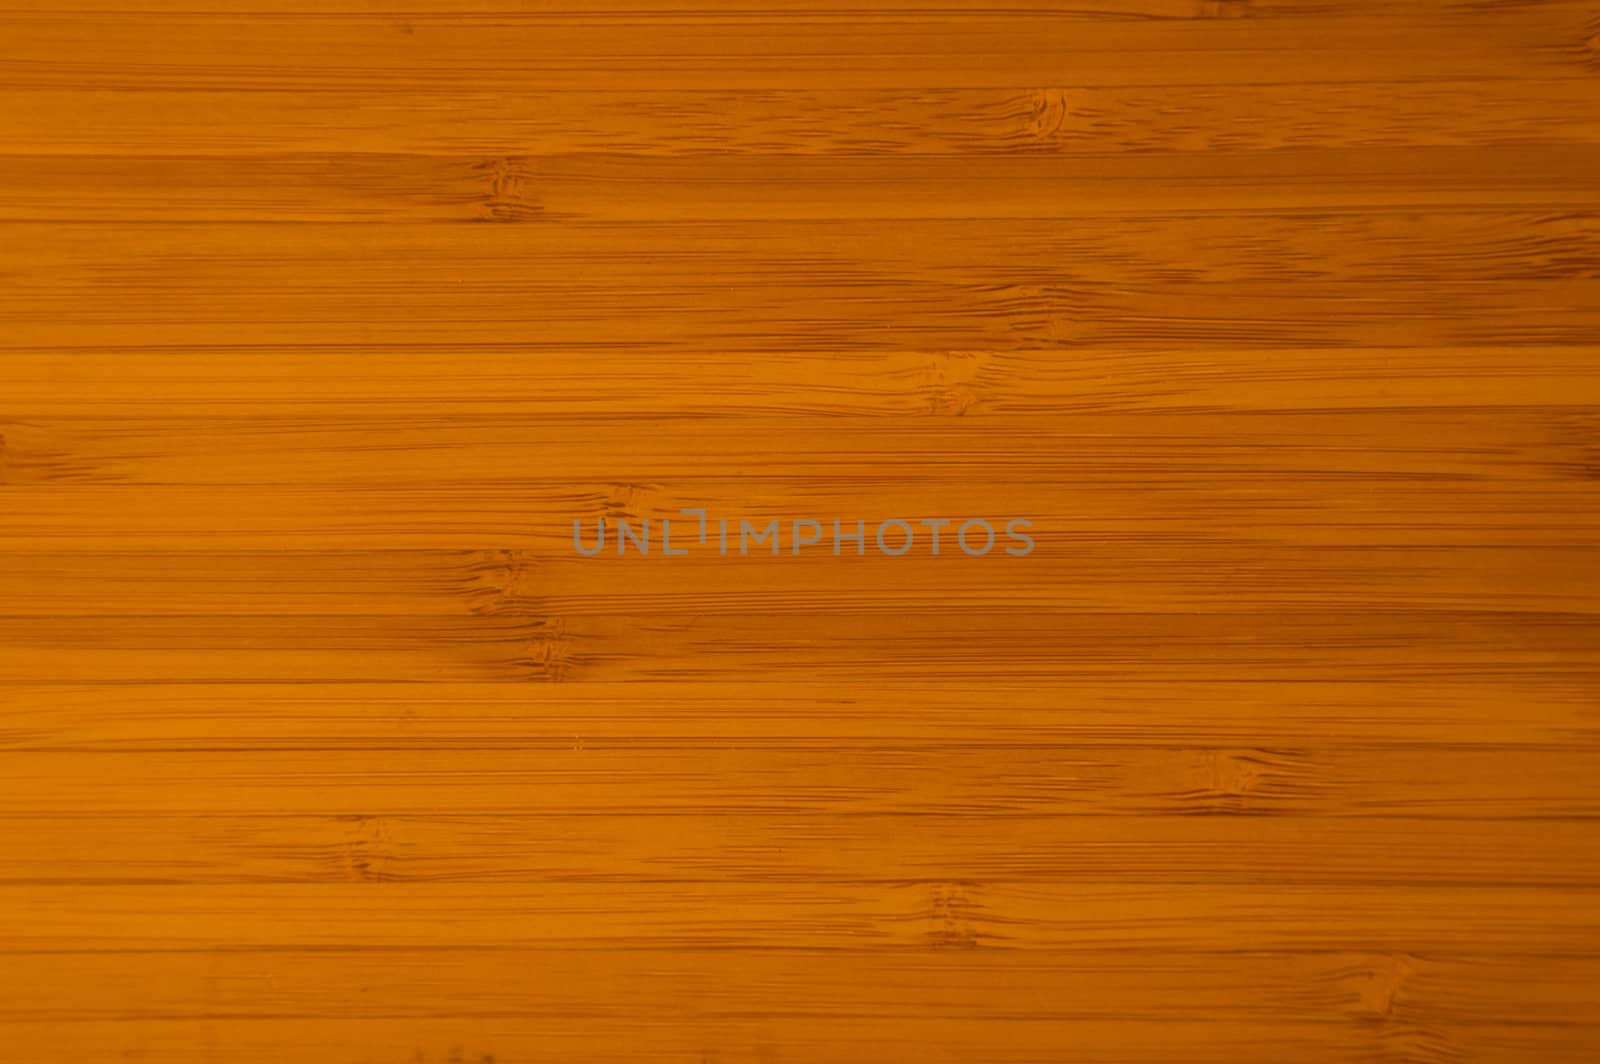 Deep orangy gold wooden board filling the image with horizontal bamboo strips